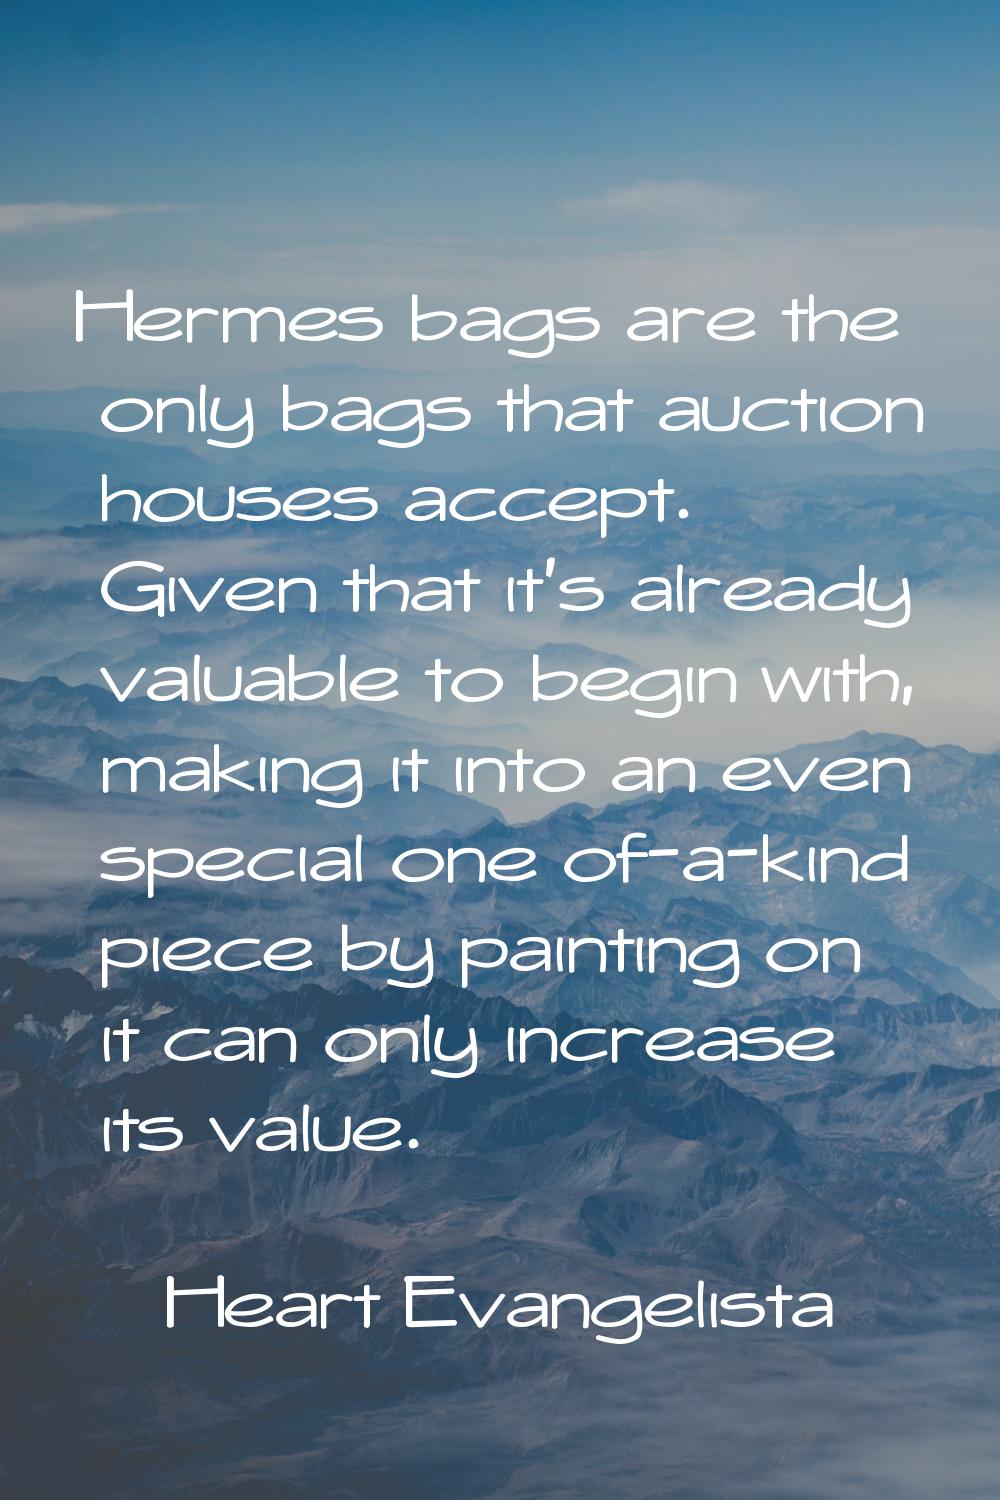 Hermes bags are the only bags that auction houses accept. Given that it's already valuable to begin